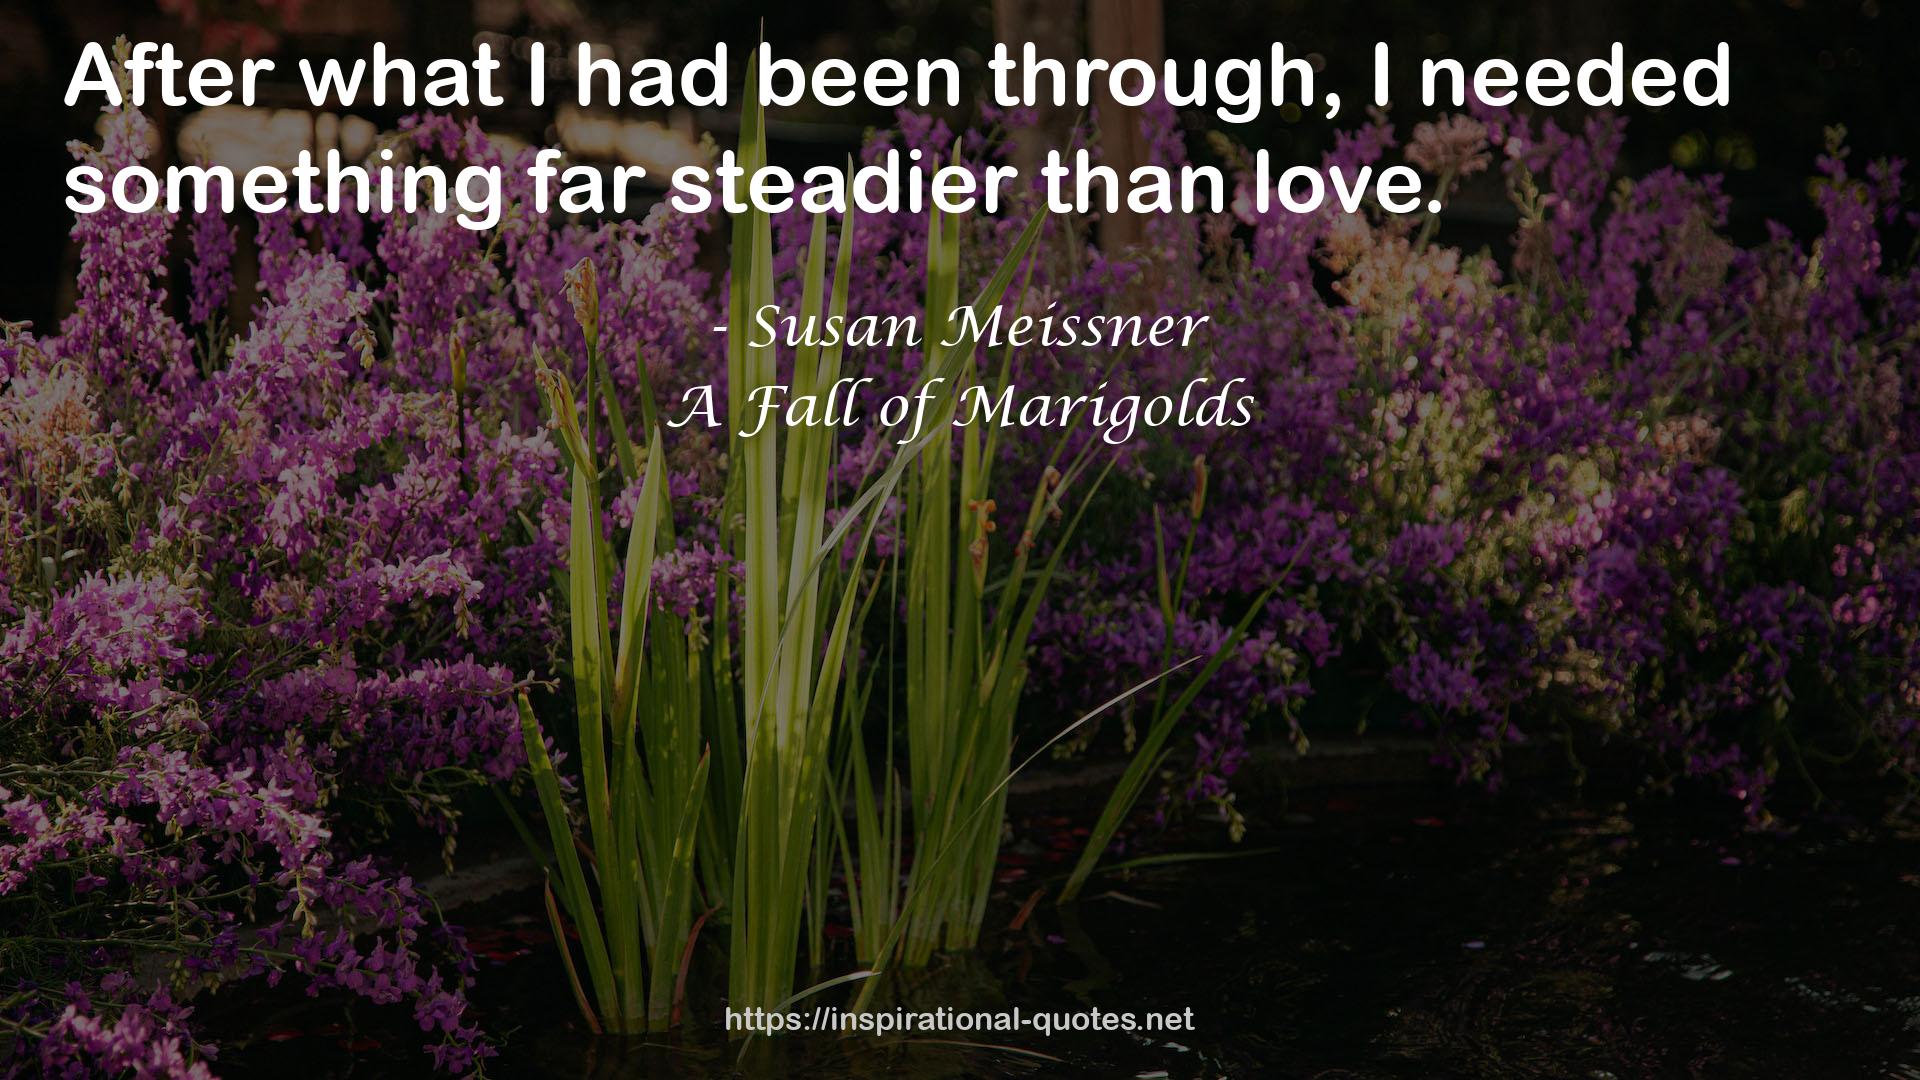 A Fall of Marigolds QUOTES